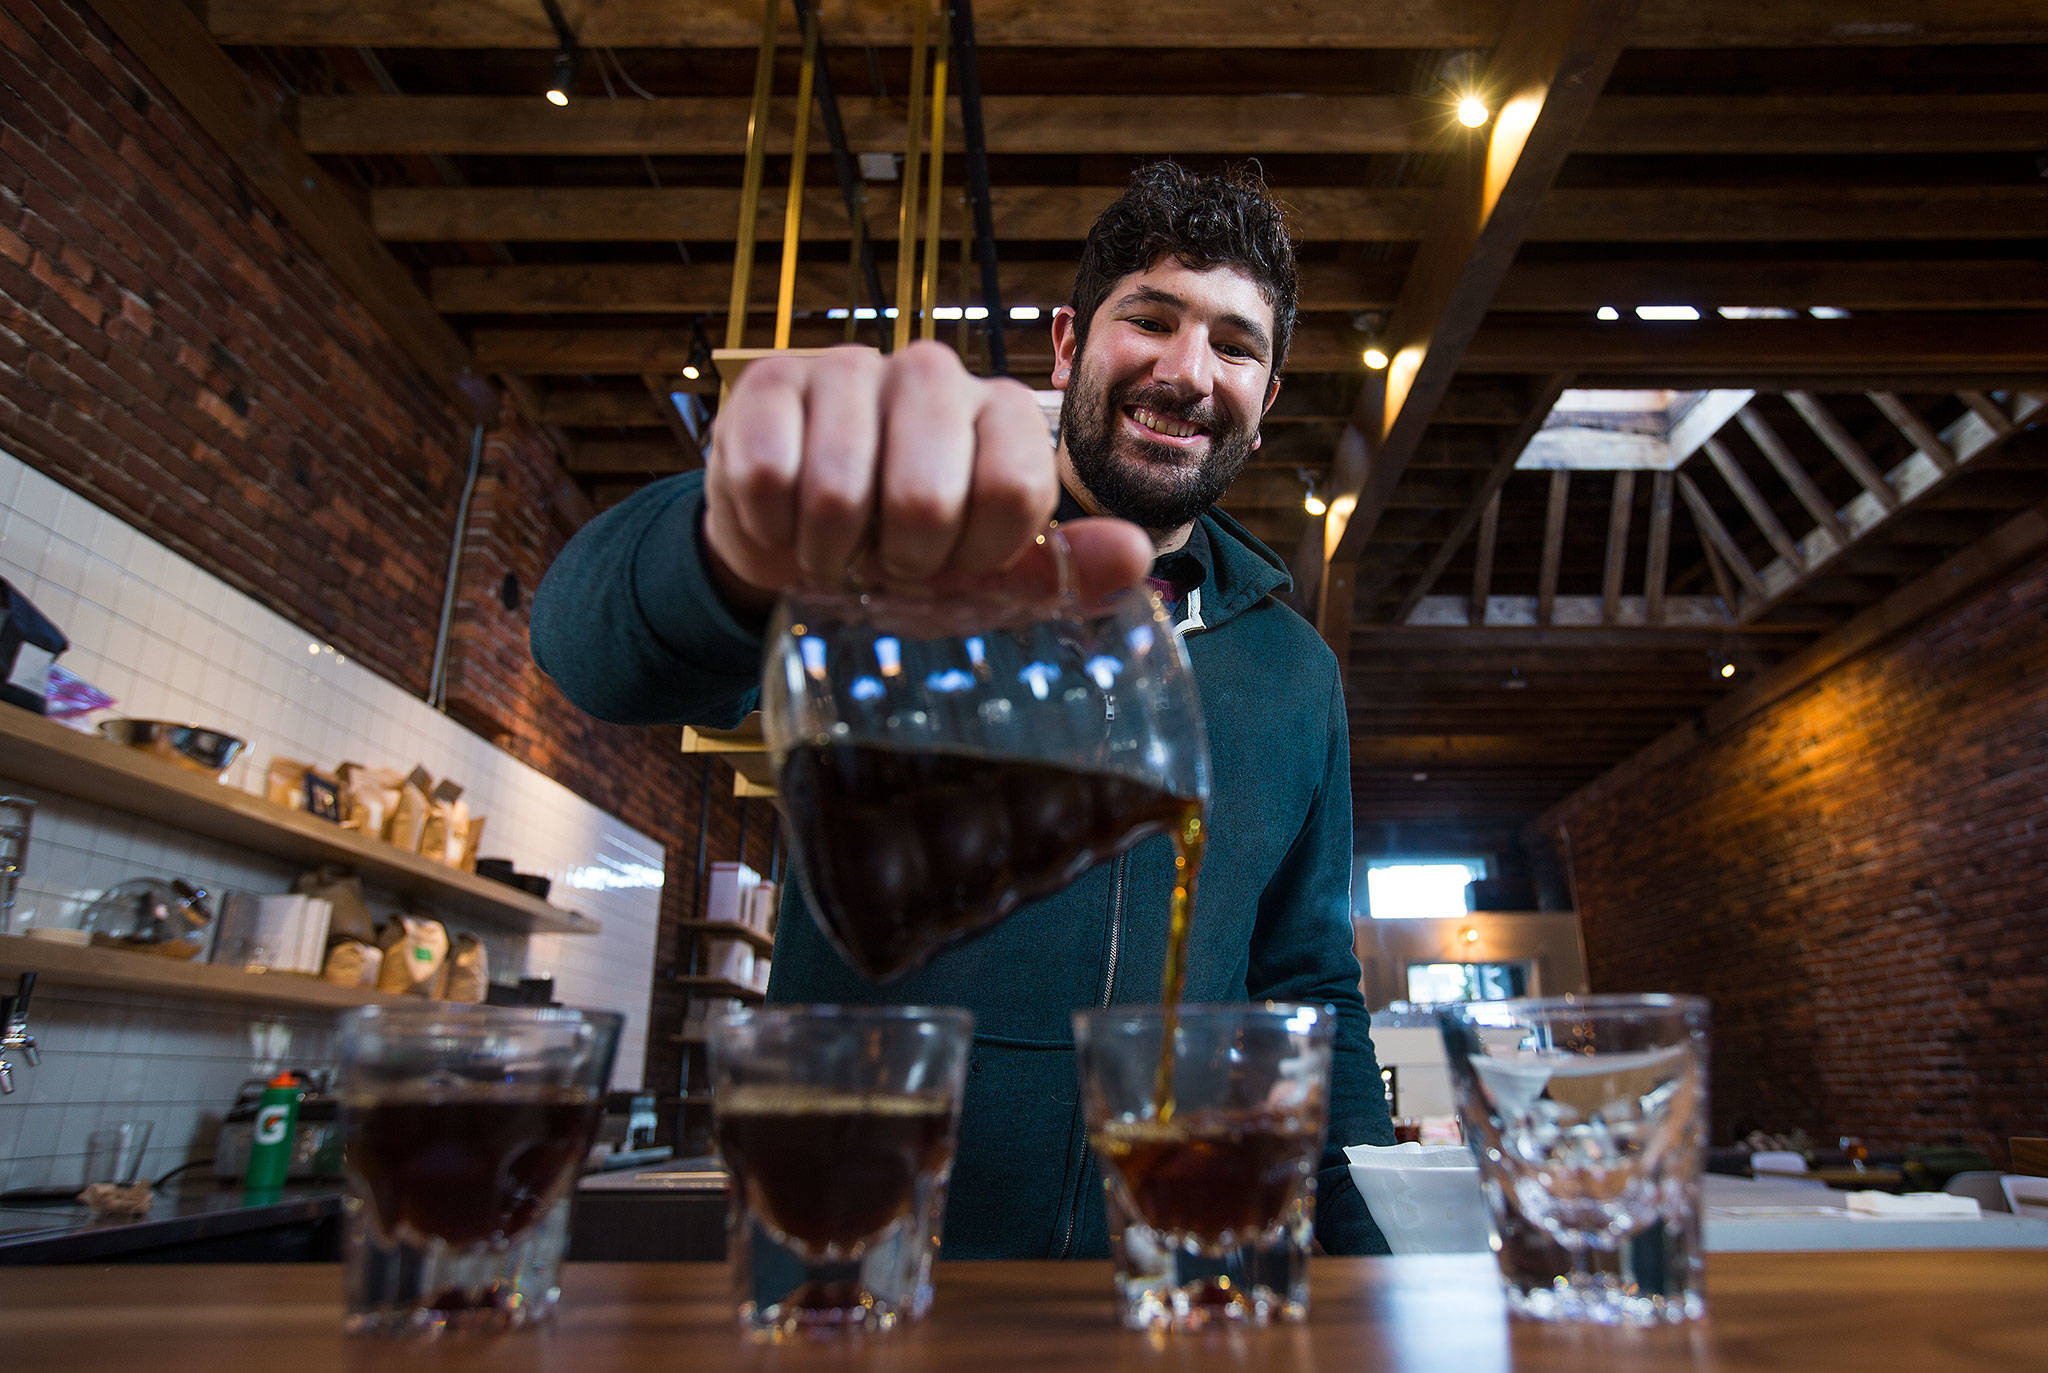 Barista Ryan Bisson pours one of the brews from Bean Box and reviews each while at Narrative Coffee on Oct. 3 in Everett. (Andy Bronson / The Herald)